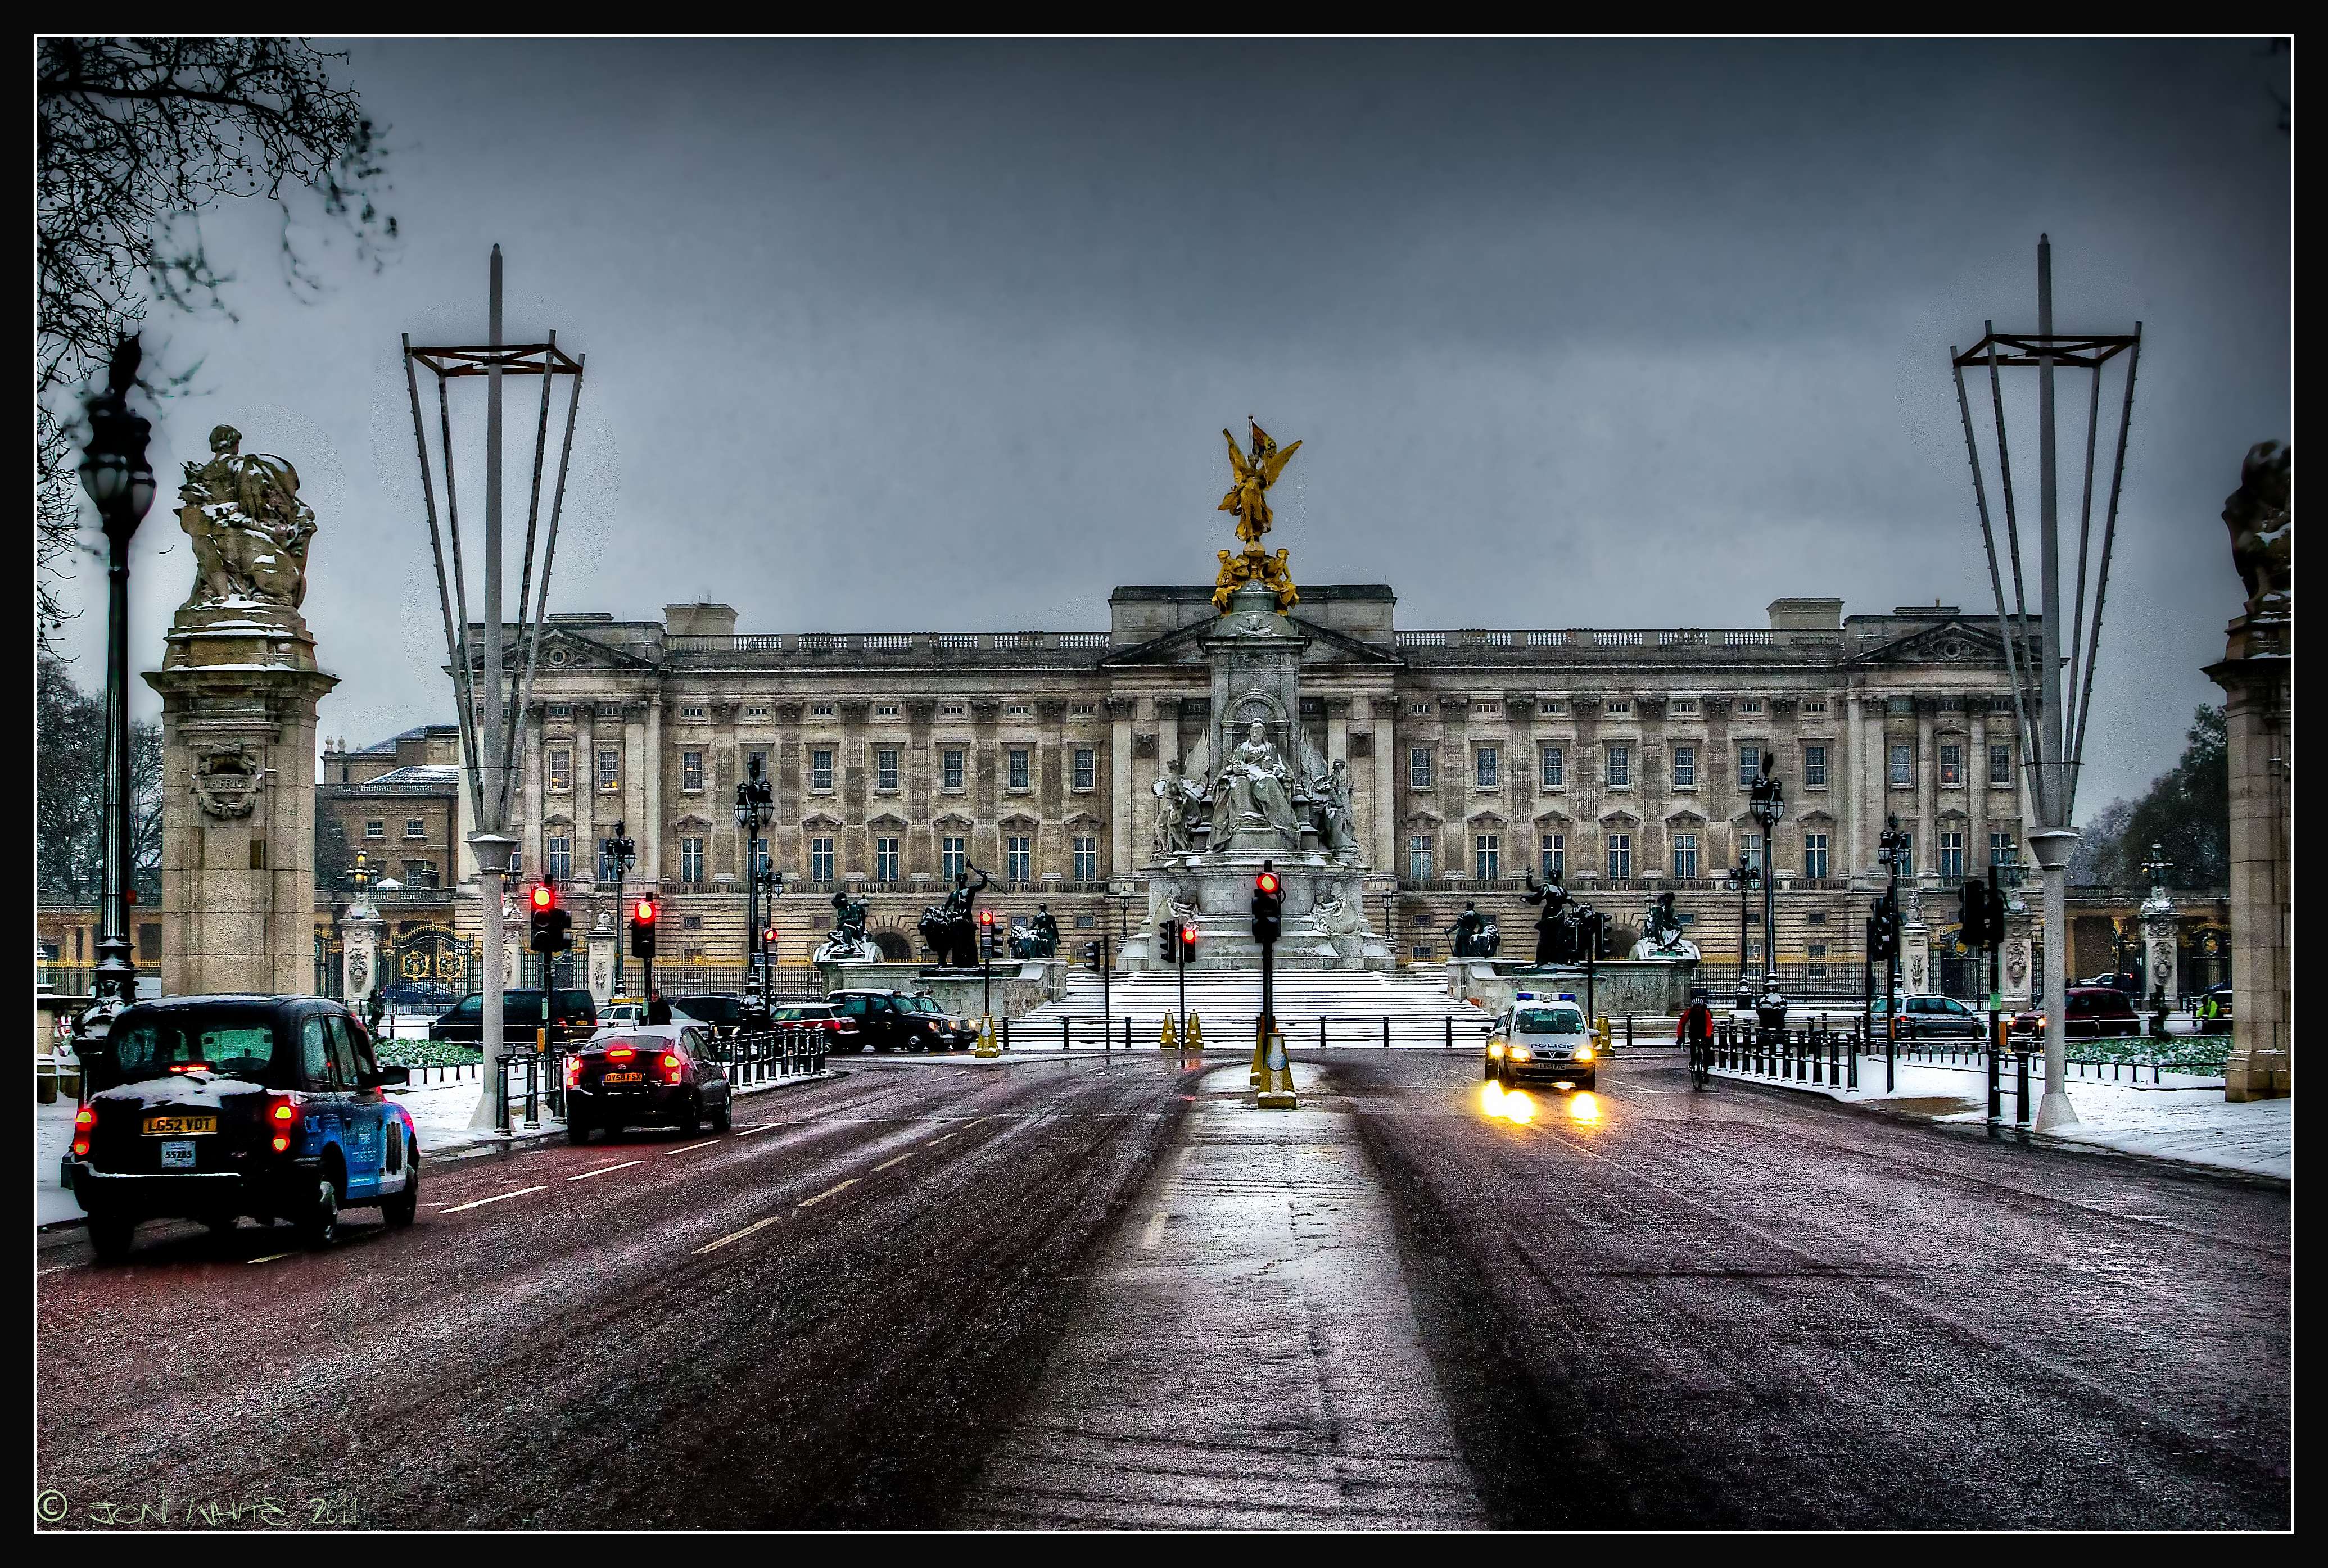 One of London attractions- Buckingham Palace